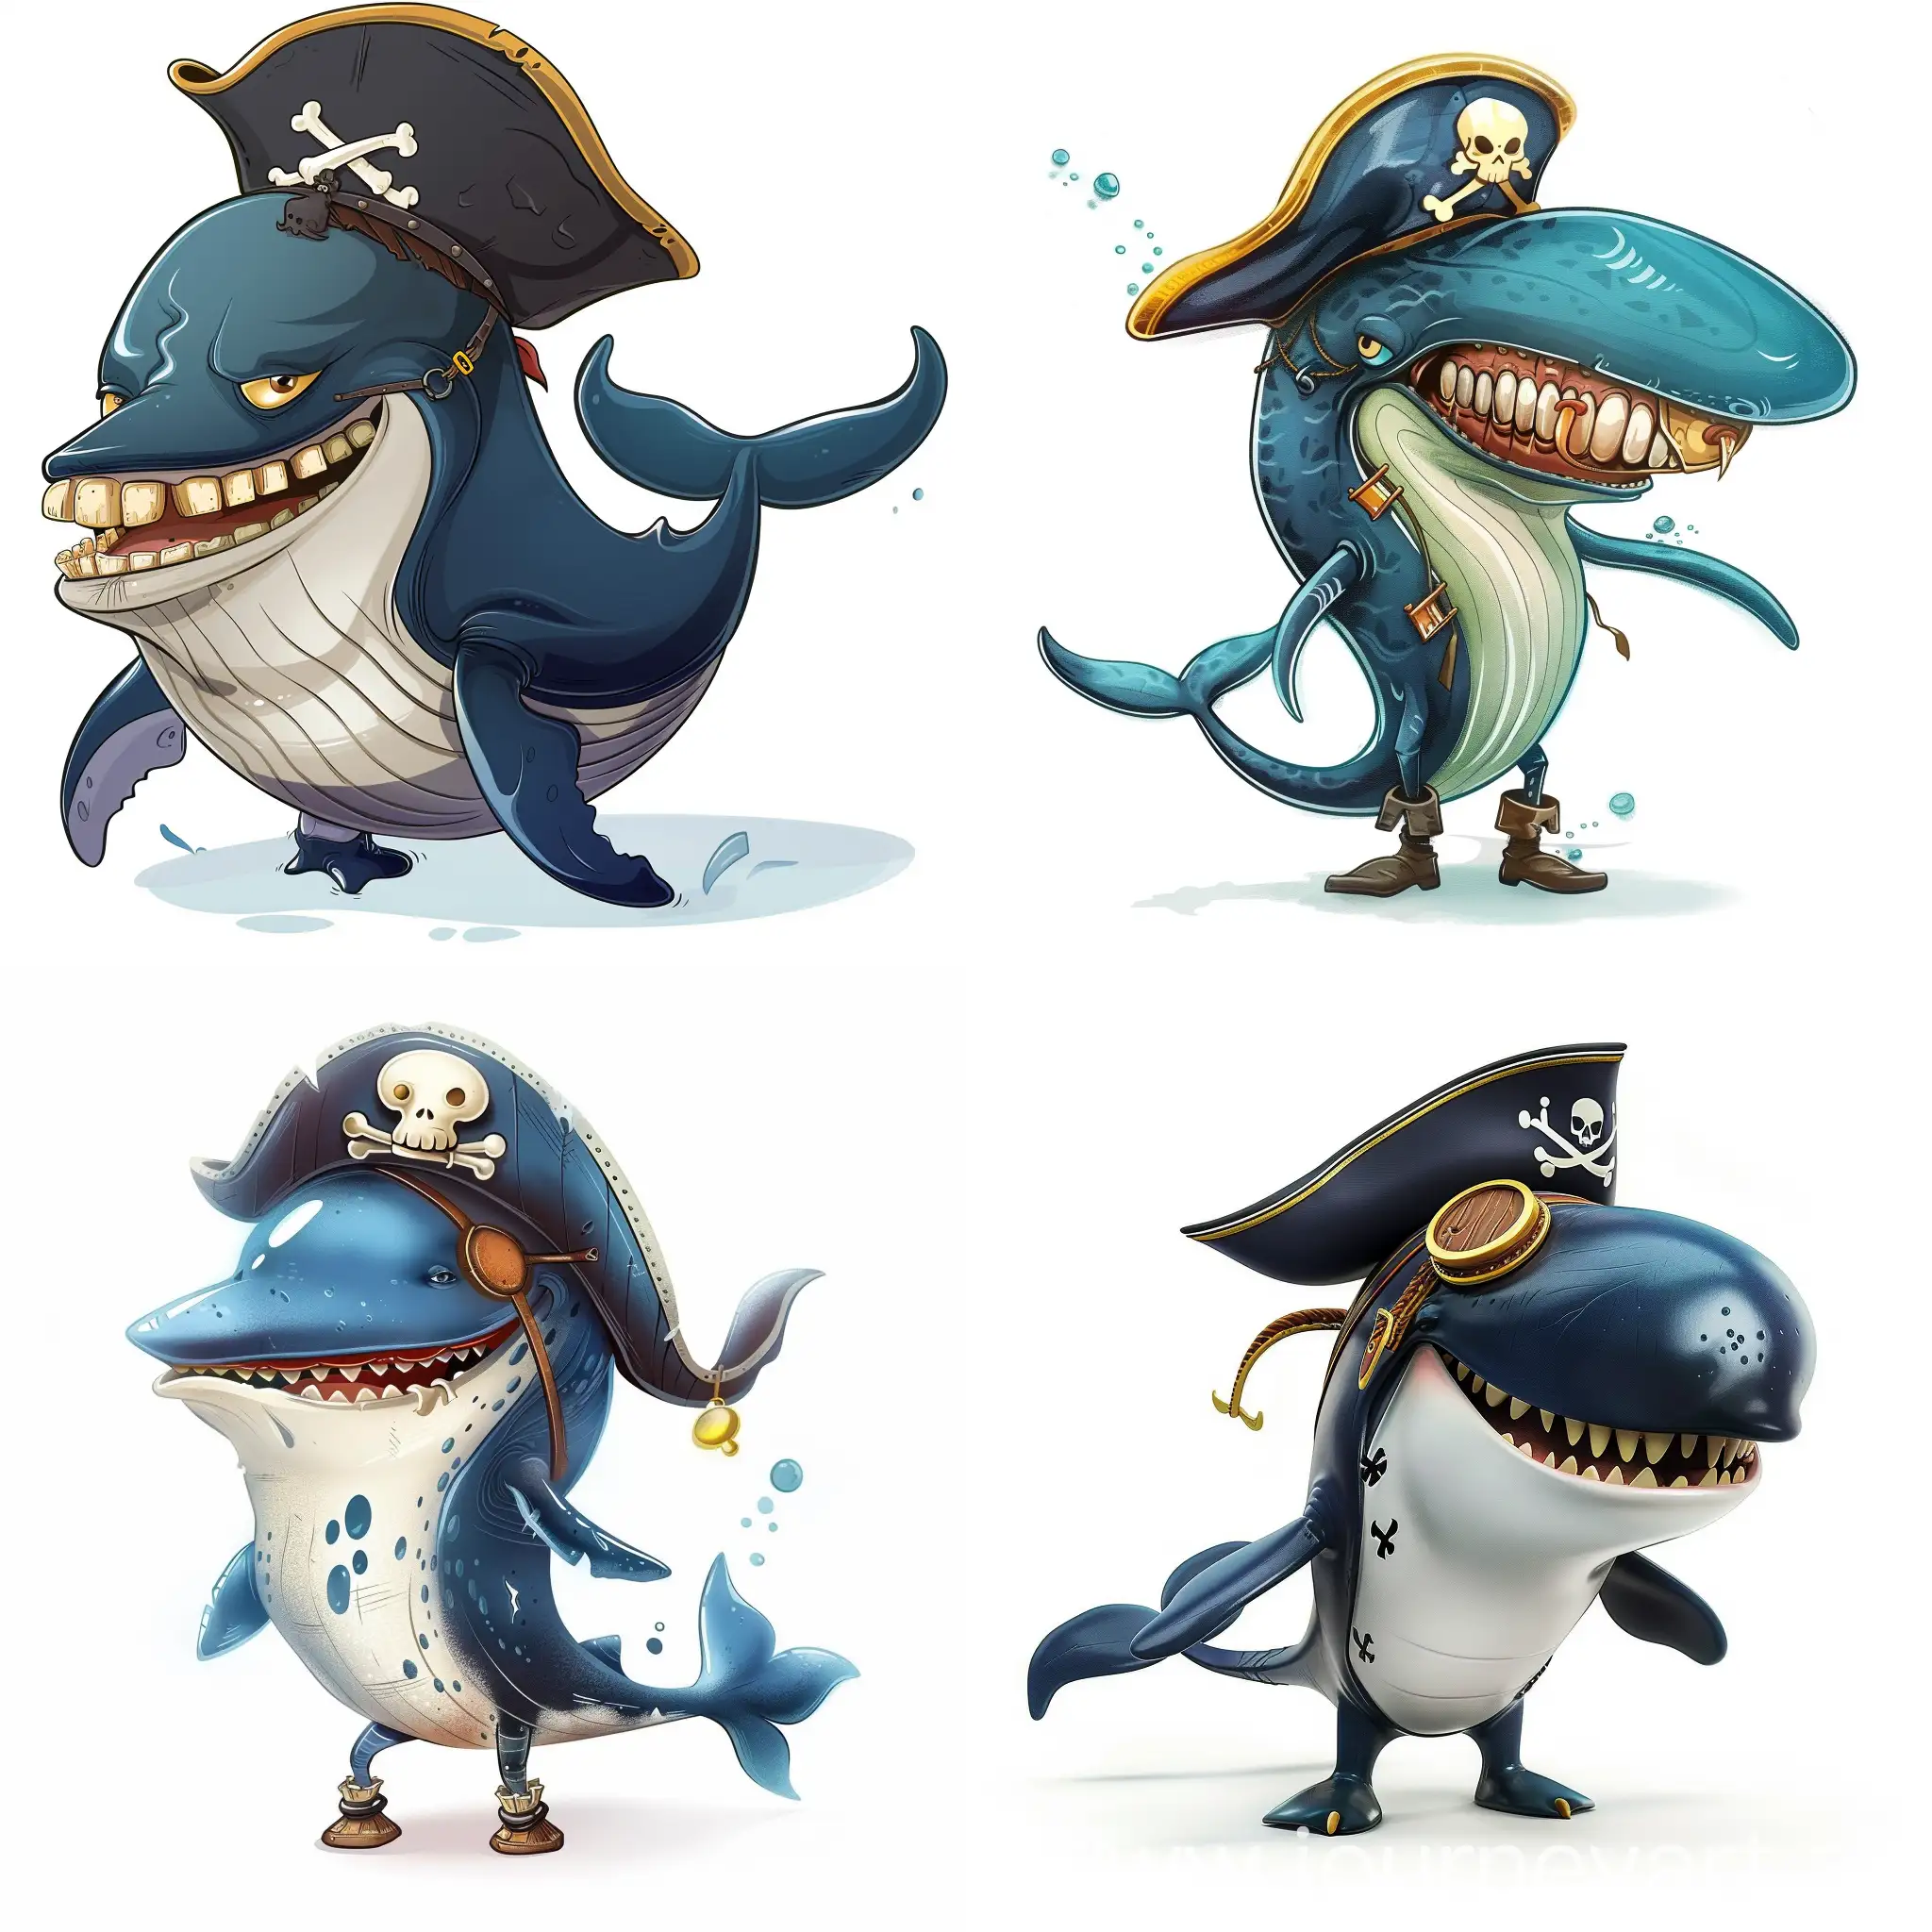 Cartoon-Whale-Avatar-in-Pirate-Costume-Smiling-on-White-Background